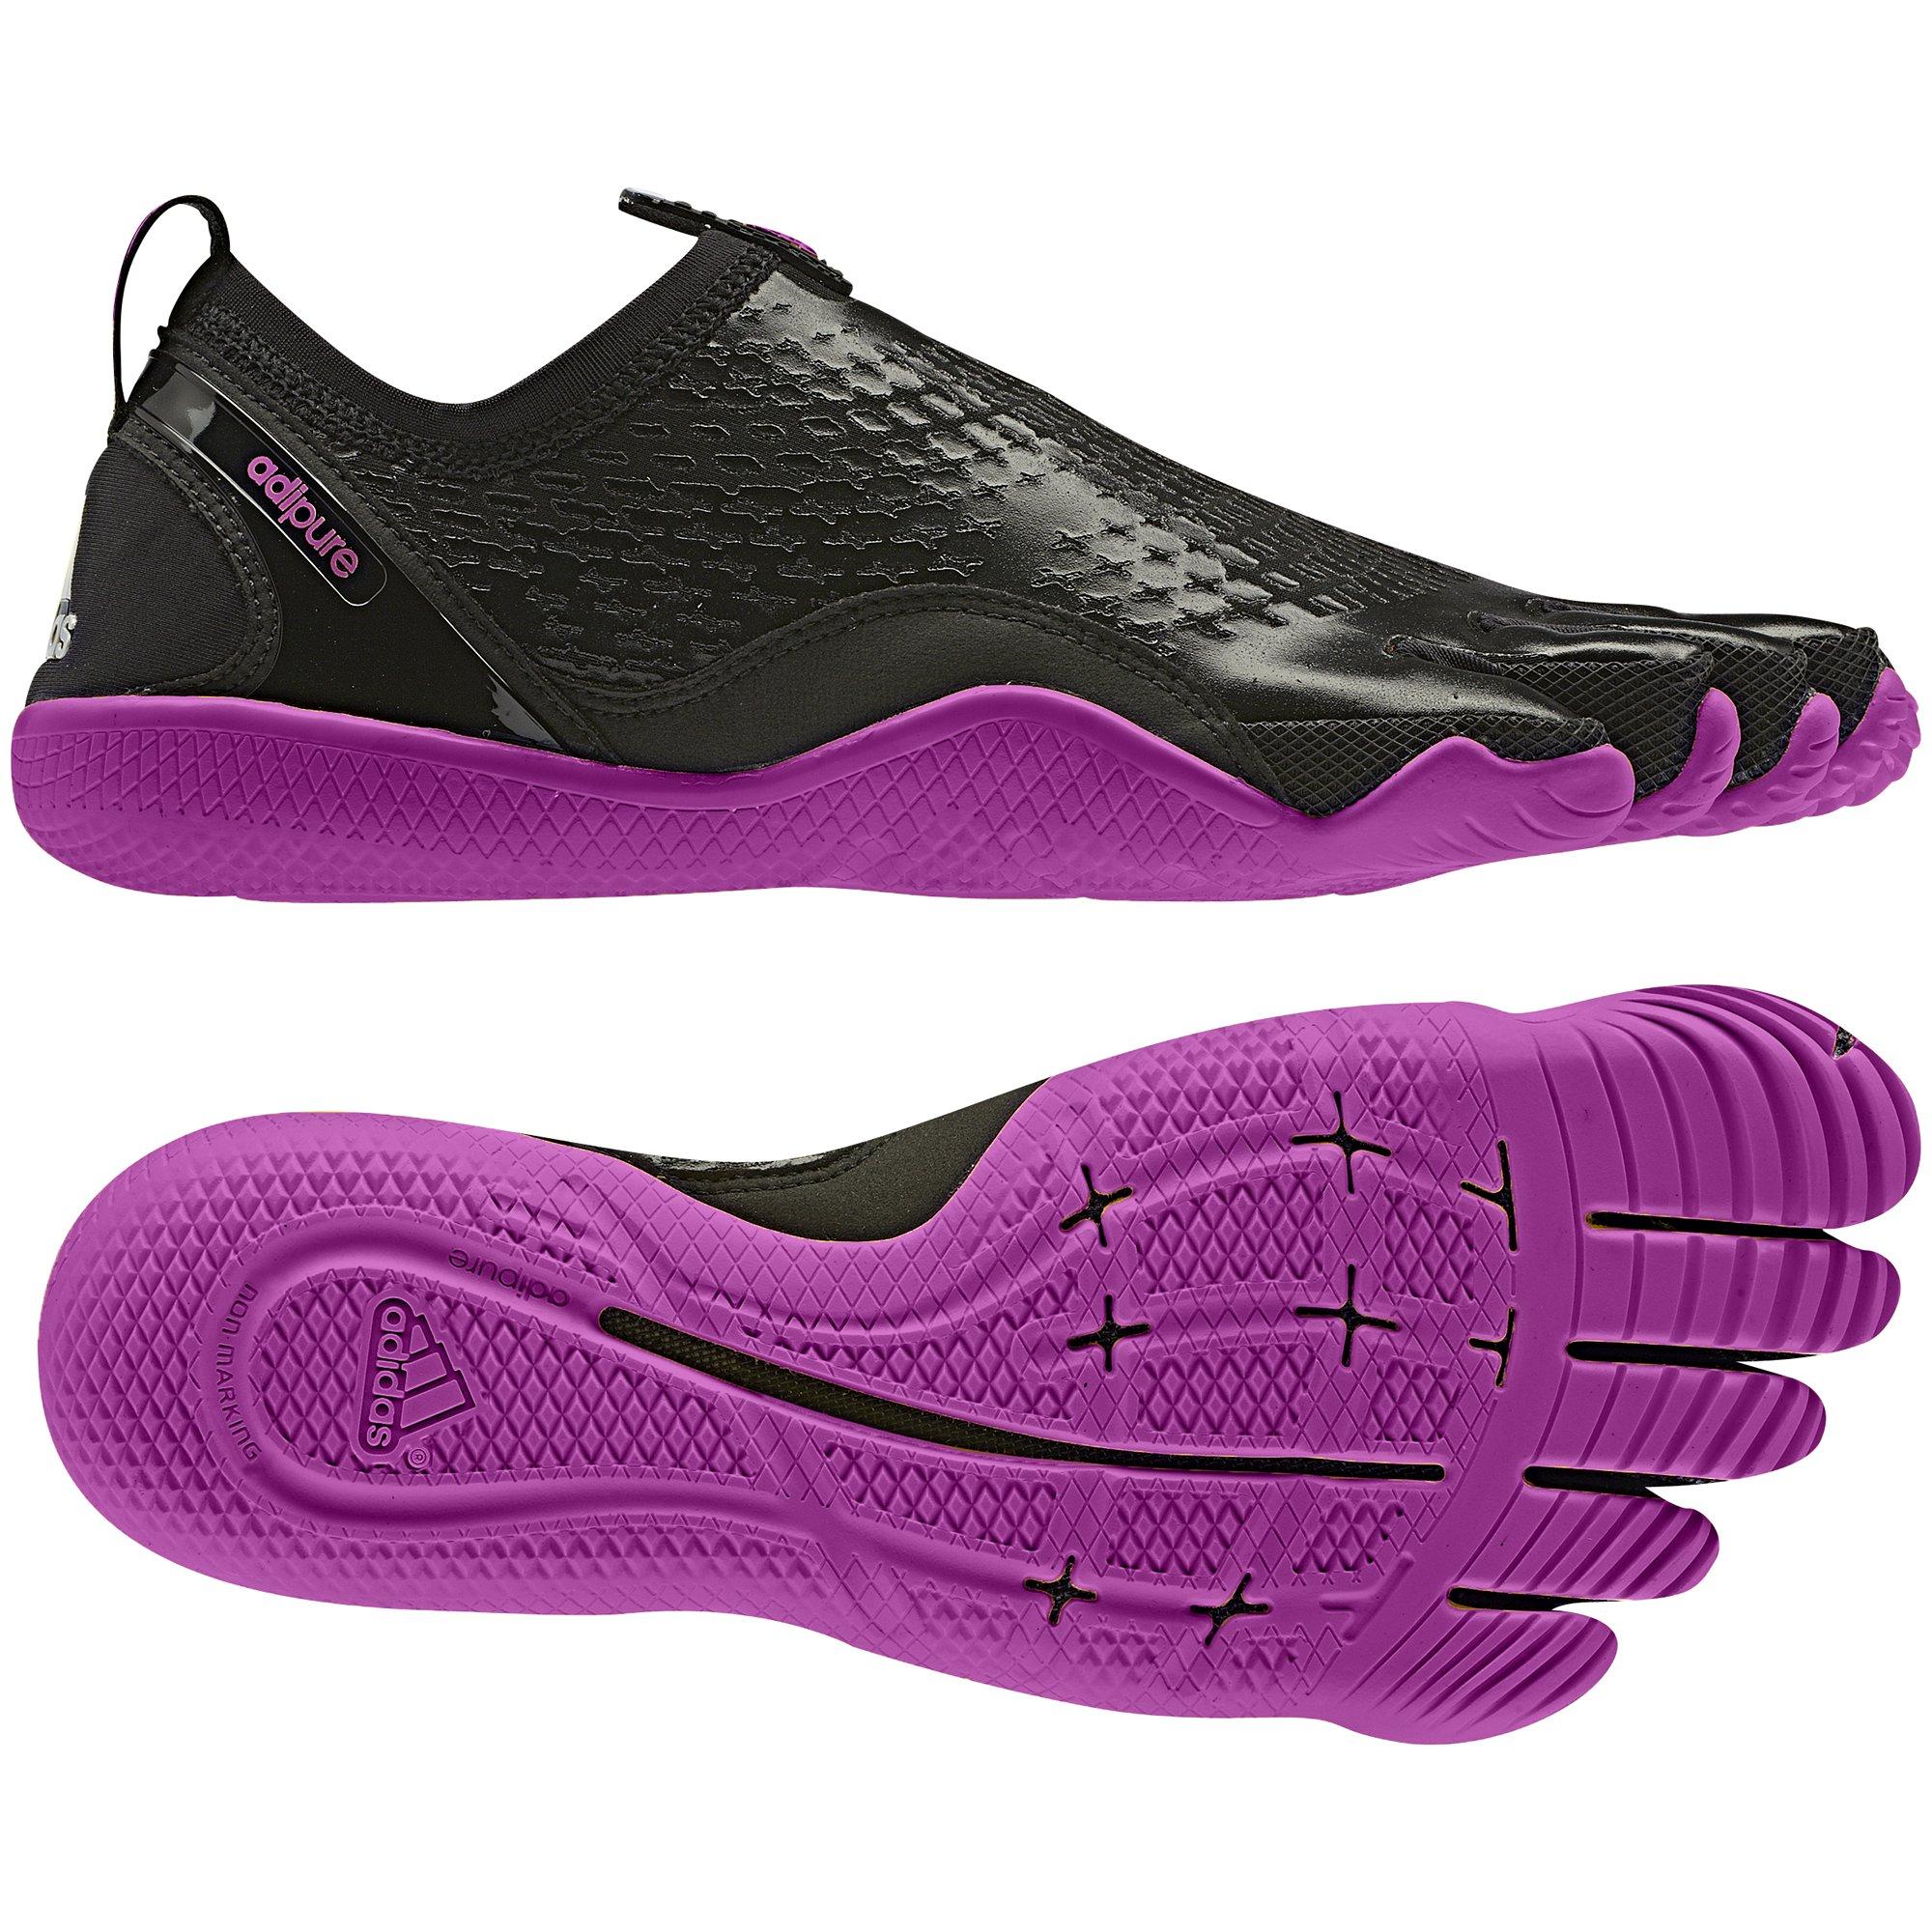 Foto adidas Adipure Trainer 1.1 Shoes Mujer foto 46655